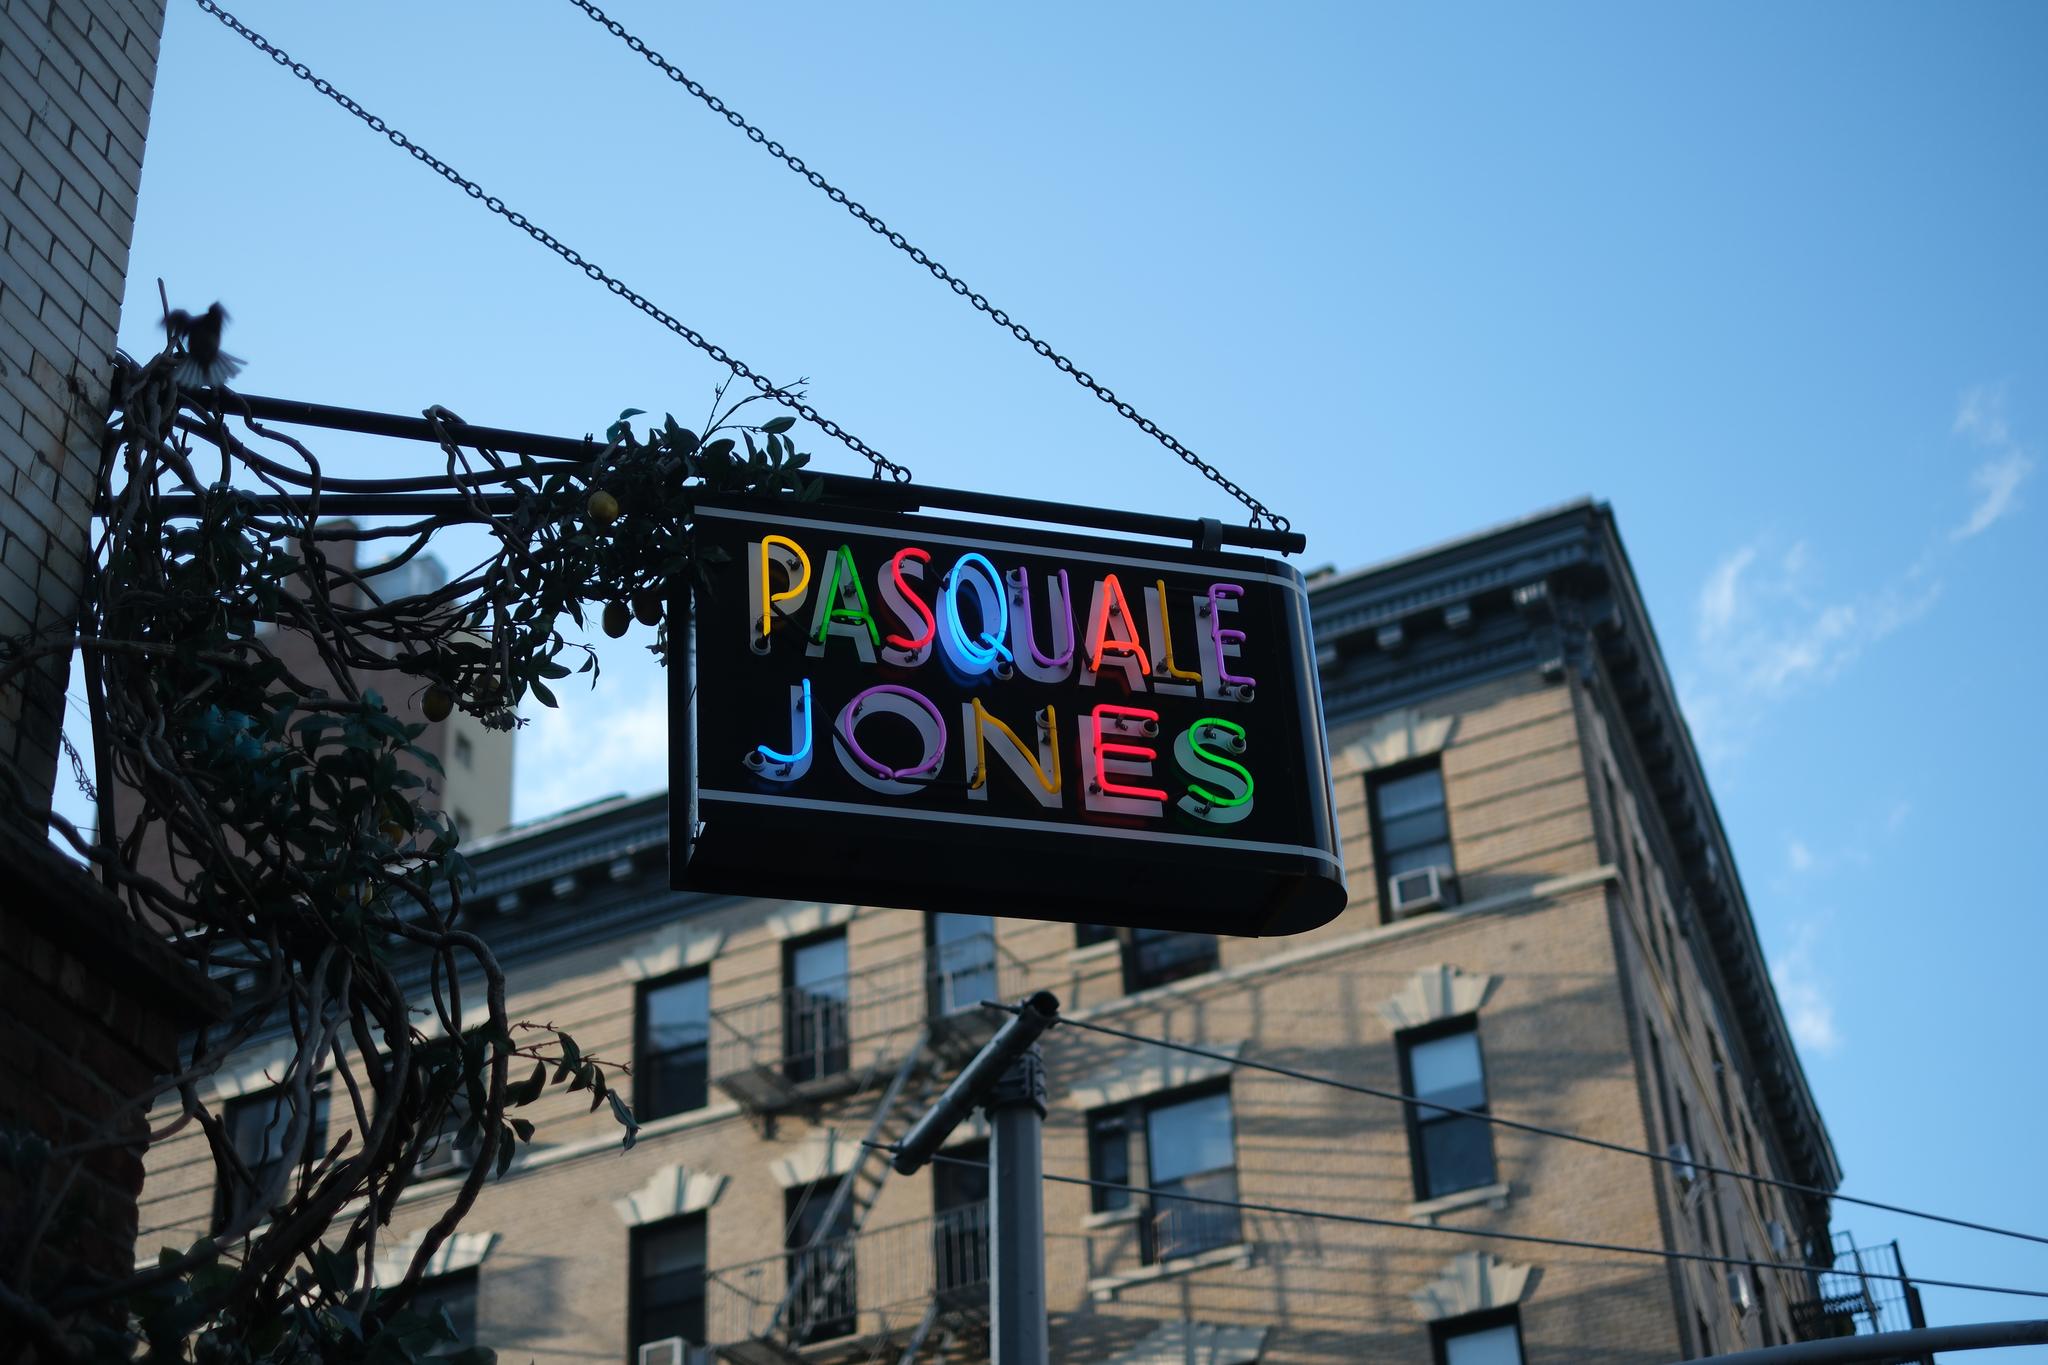 A colorful neon sign reading Pasquale Jones hangs on a metal bracket against a backdrop of a multi-story brick building and a clear blue sky